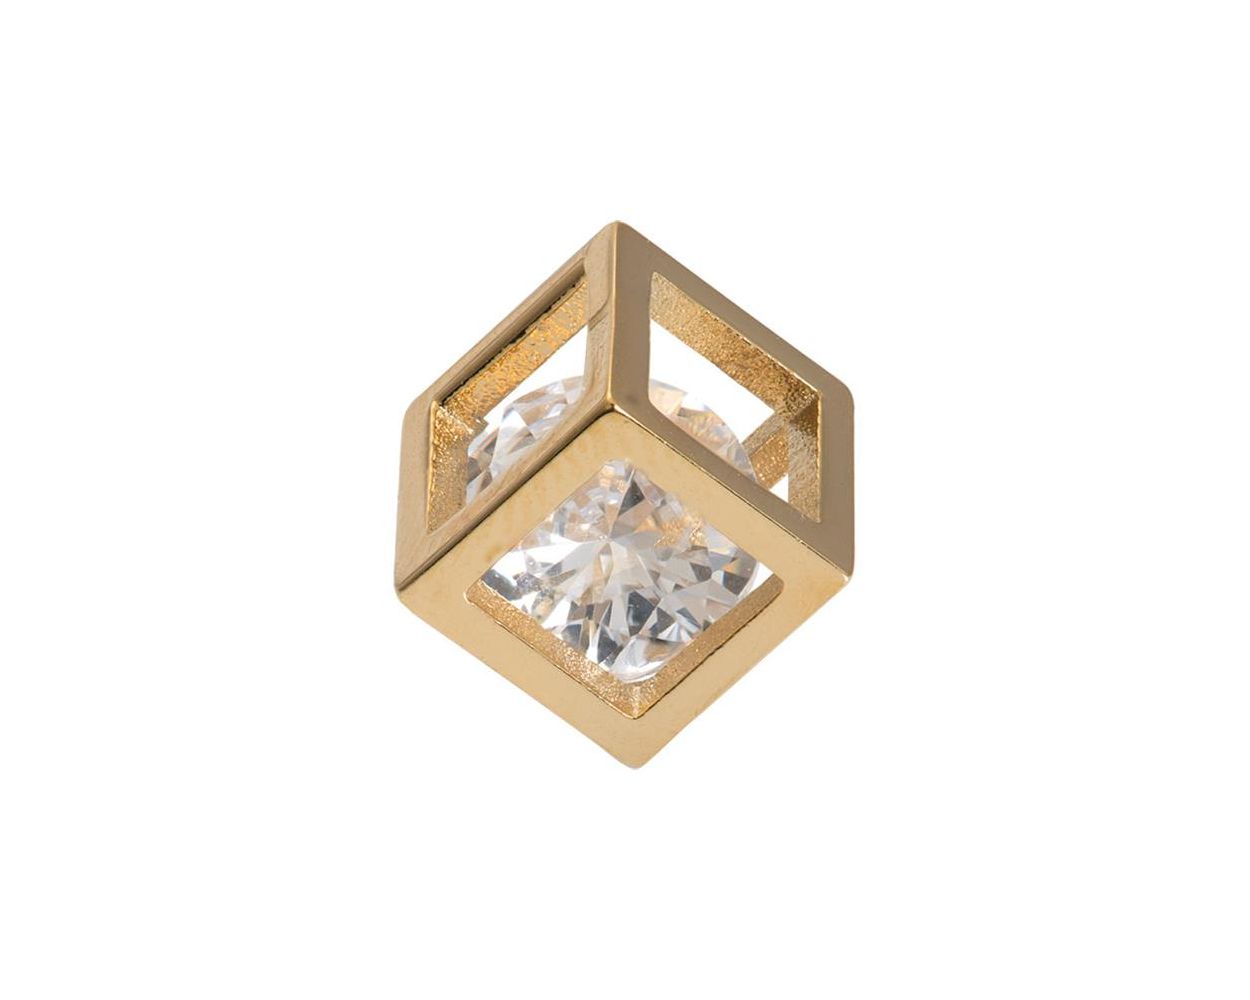 iXXXi Charm Hollow Cube Gold Color - C43037